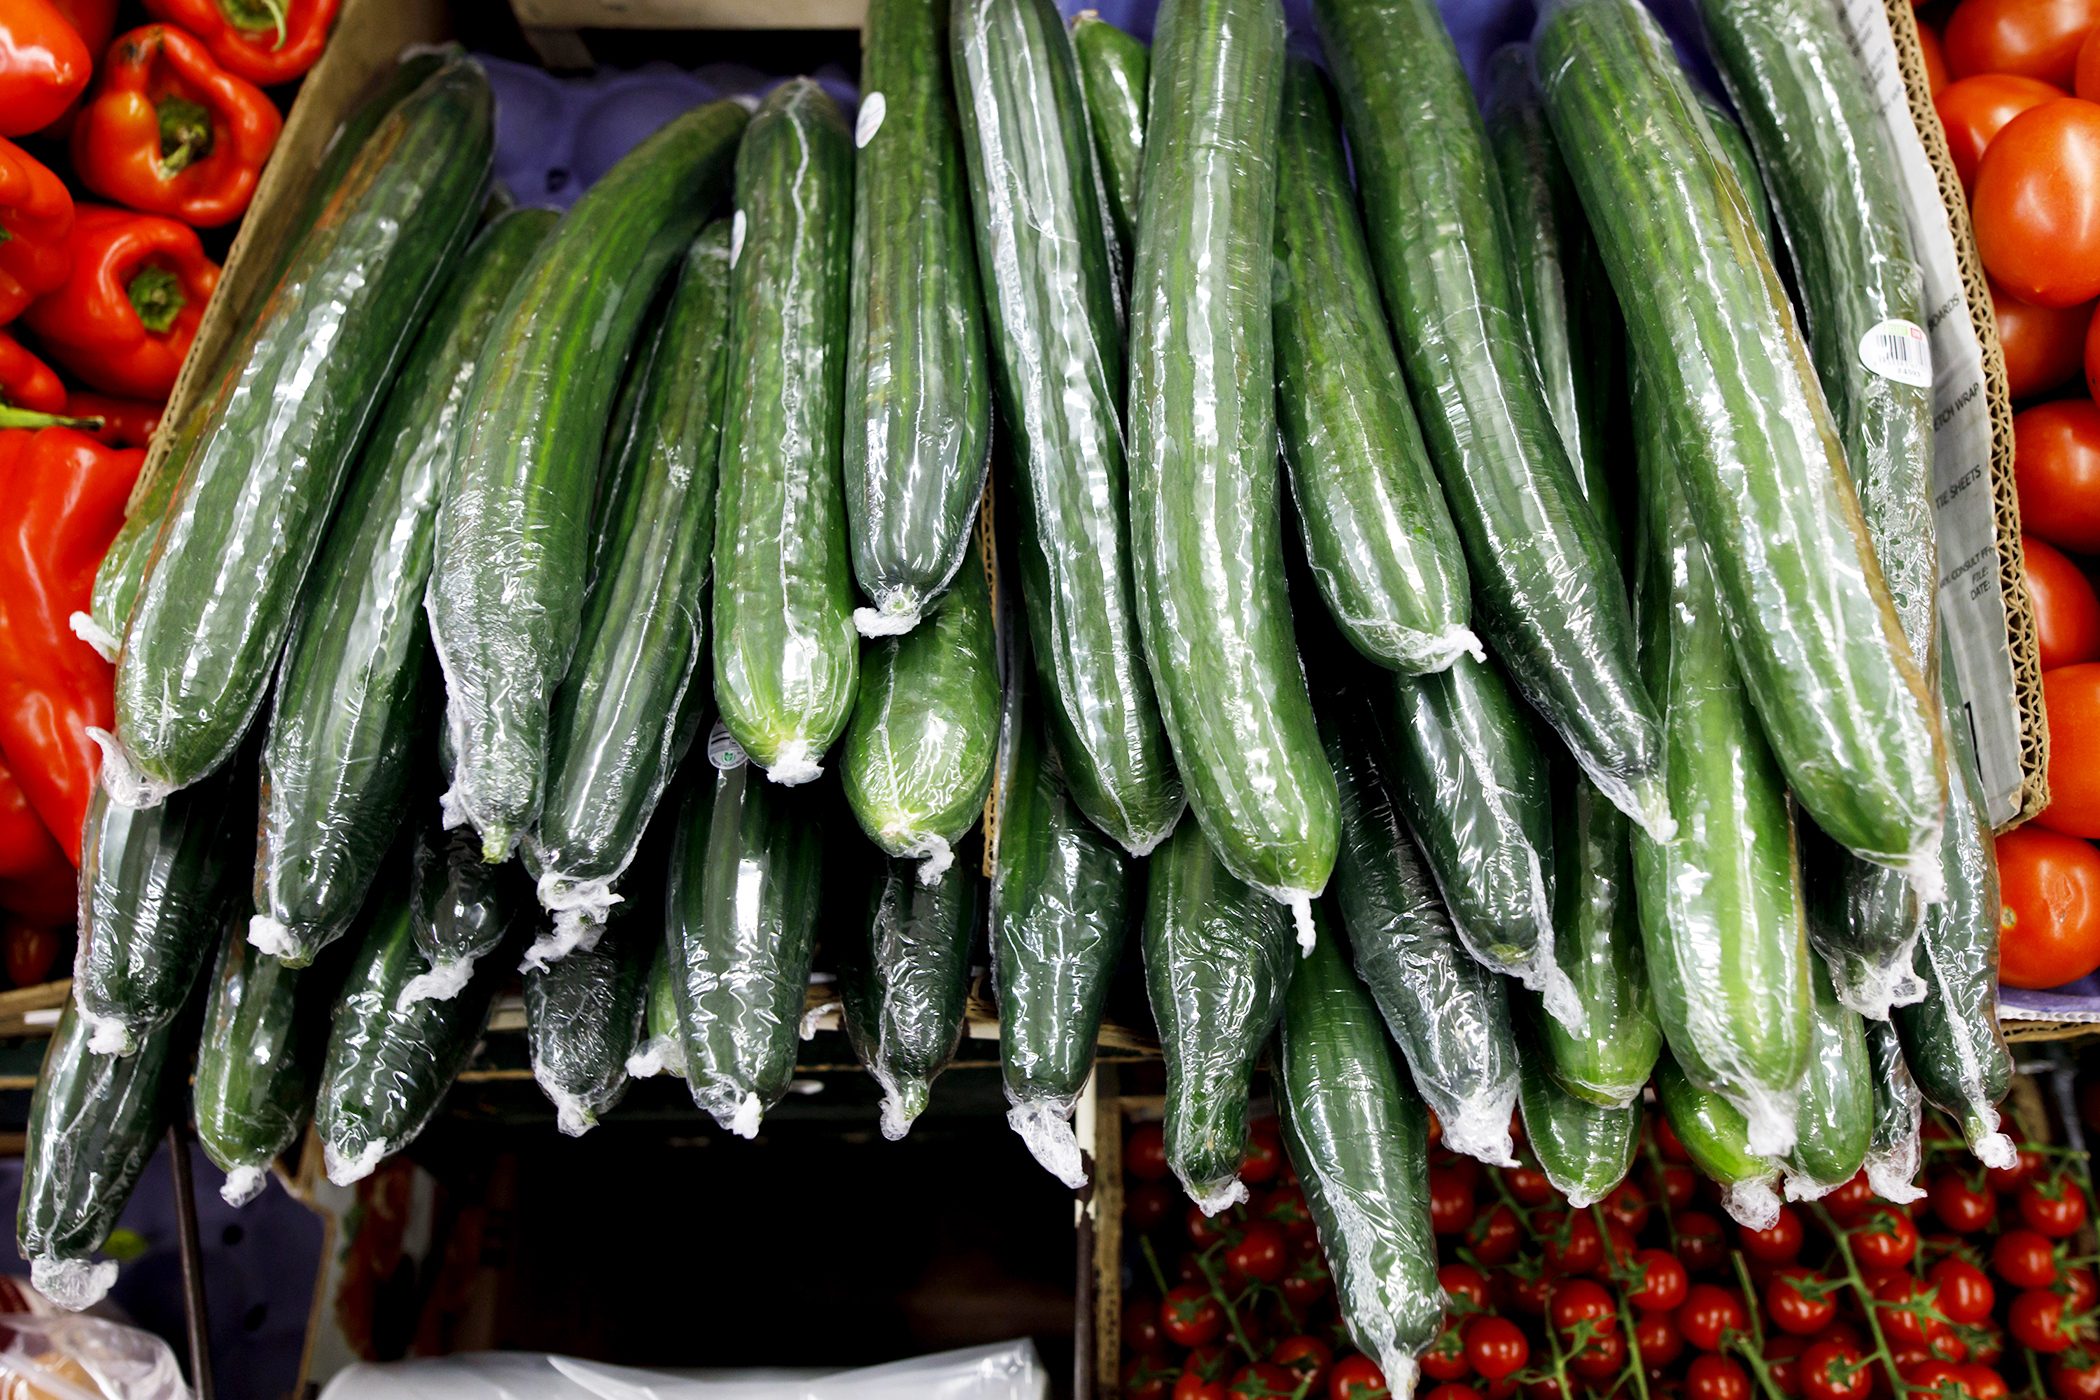 https://www.tasteofhome.com/wp-content/uploads/2021/11/english-cucumbers-wrapped-in-plastic-GettyImages-1157968037.jpg?fit=680%2C454